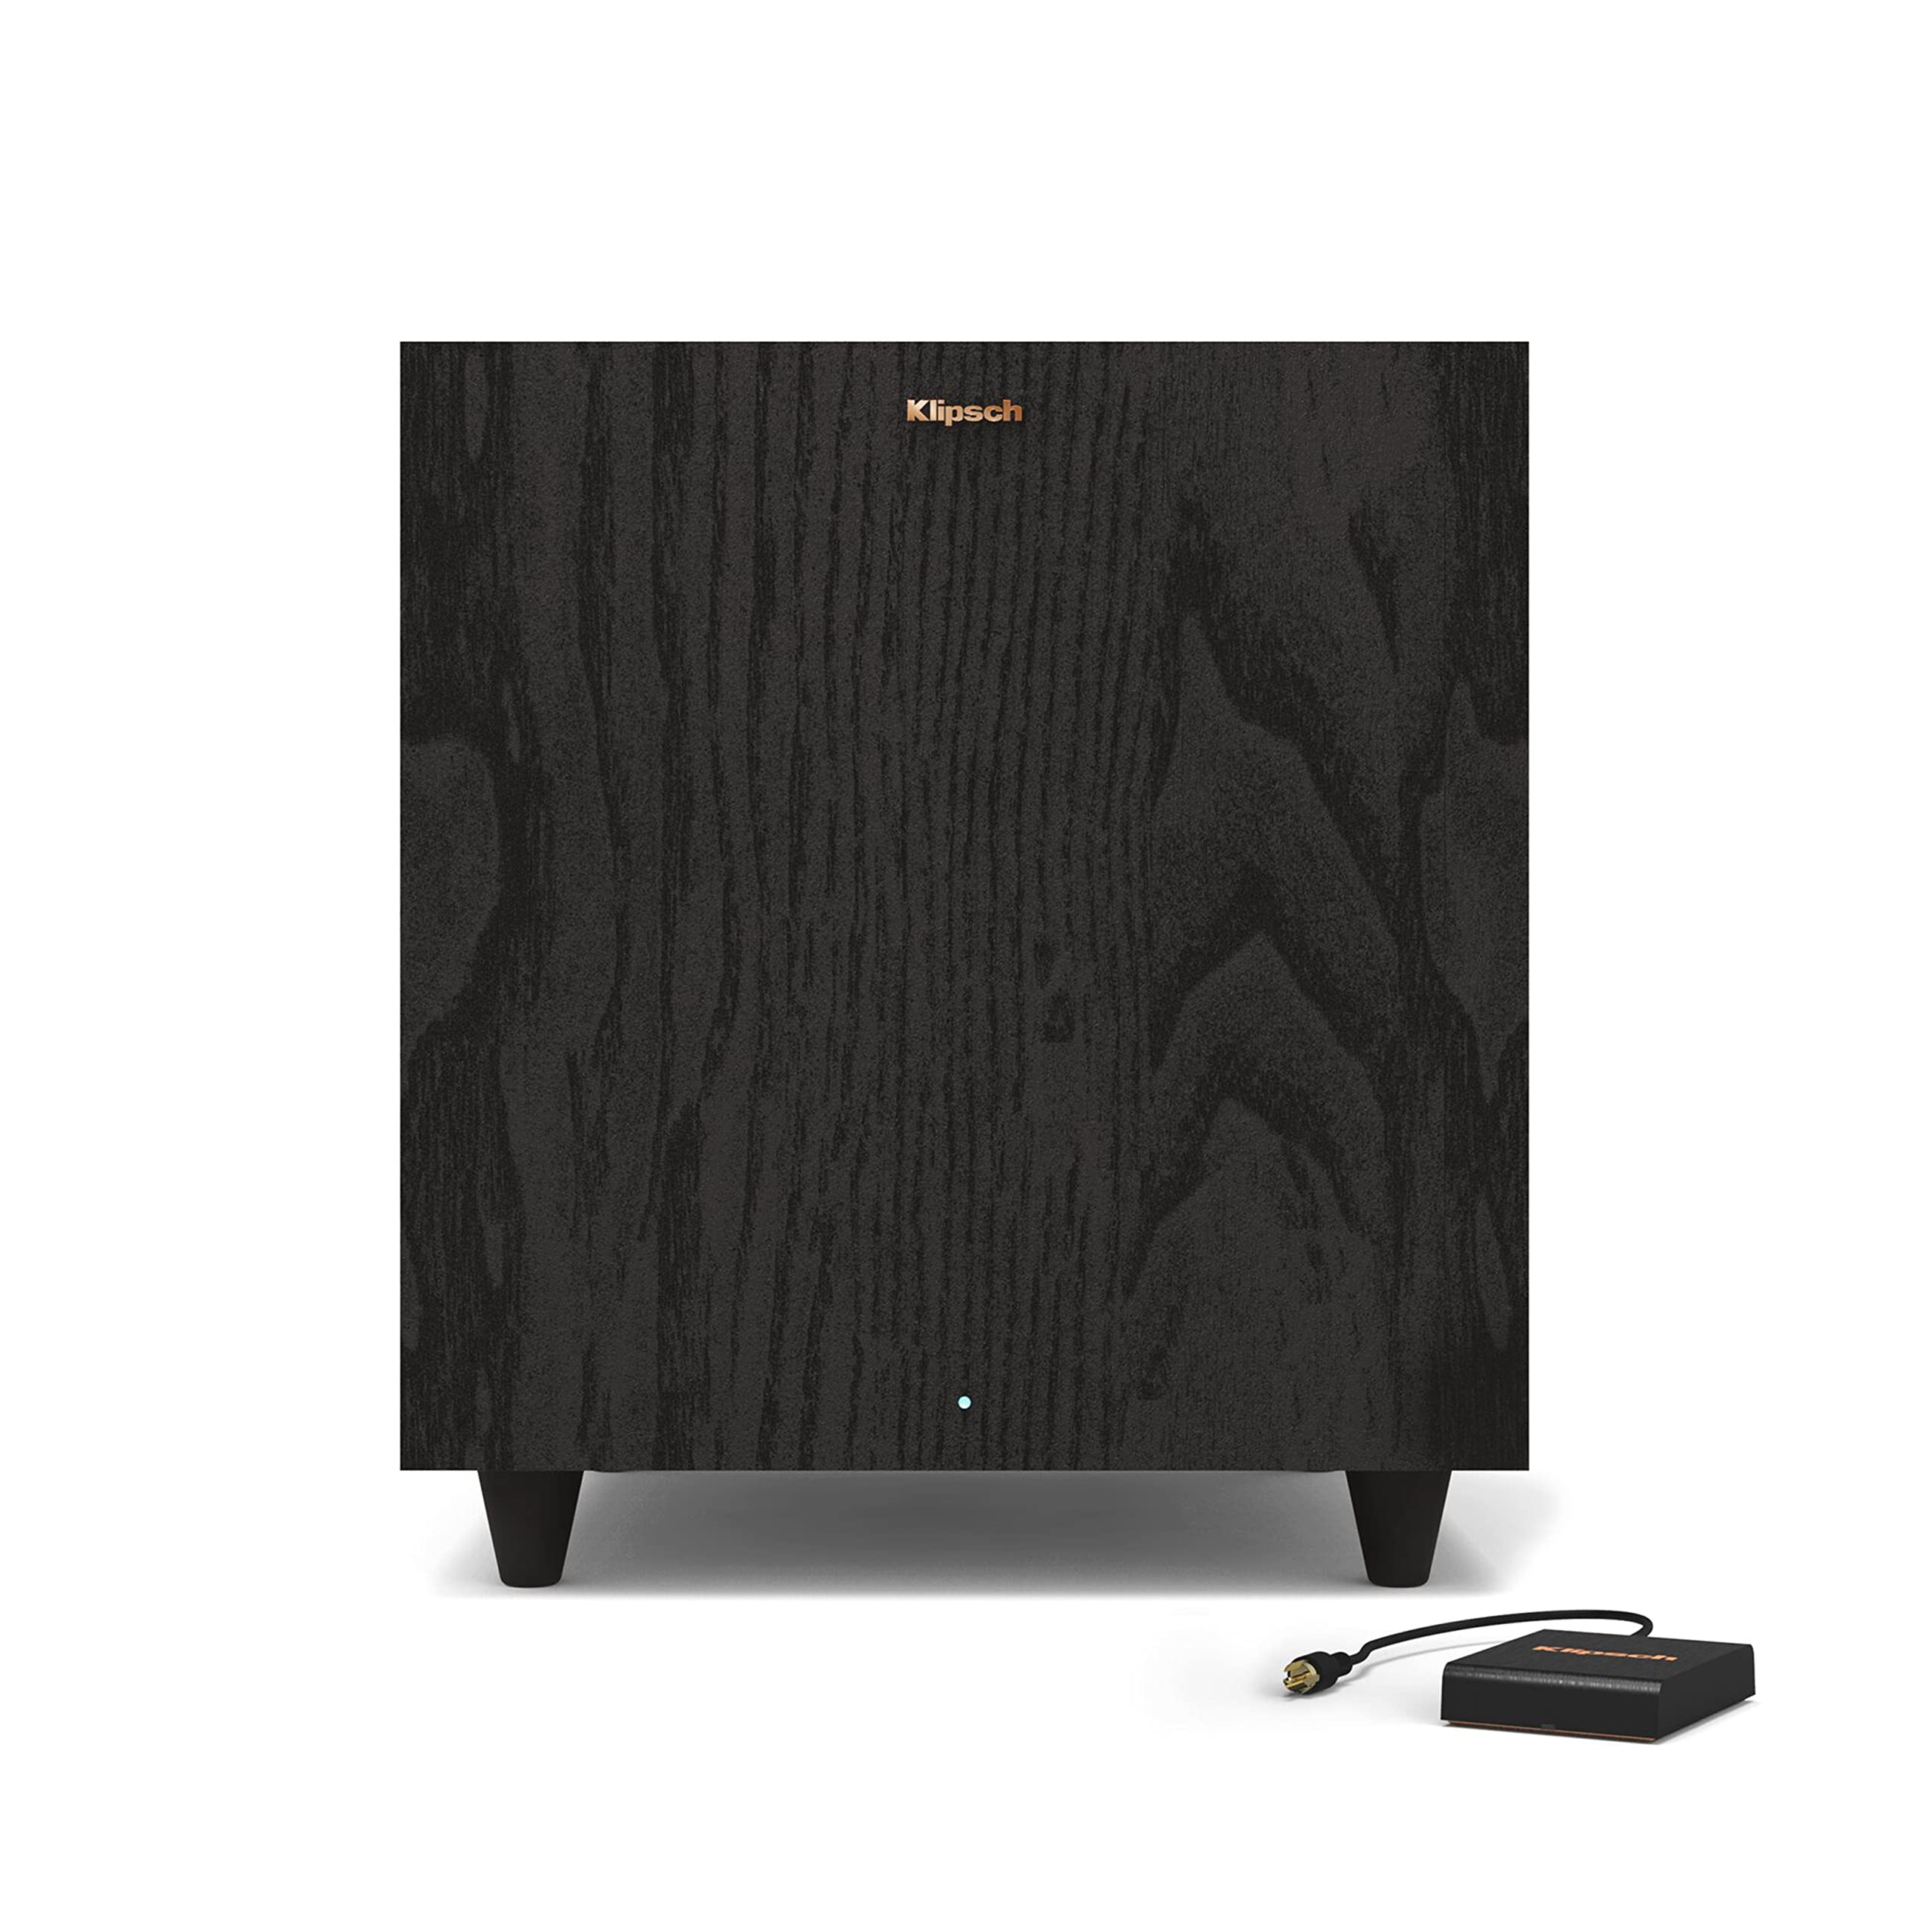 Klipsch R-80SWi 8-inch 150W Wireless Subwoofer with High Performance Driver for Deep Bass Black